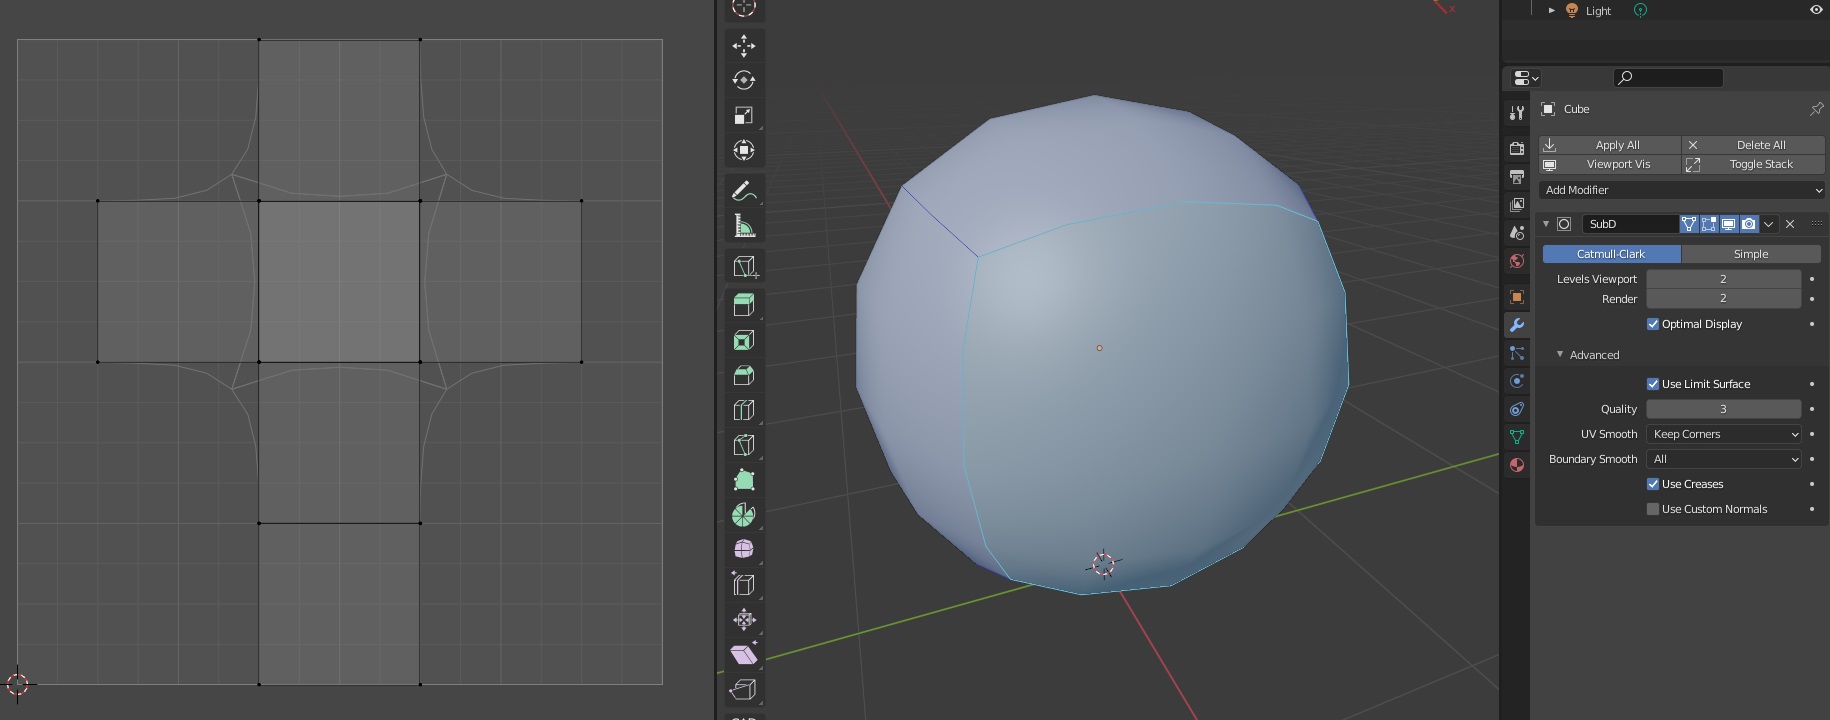 Subdivision surface in Blender 2.8 behave different compared to Maya ...